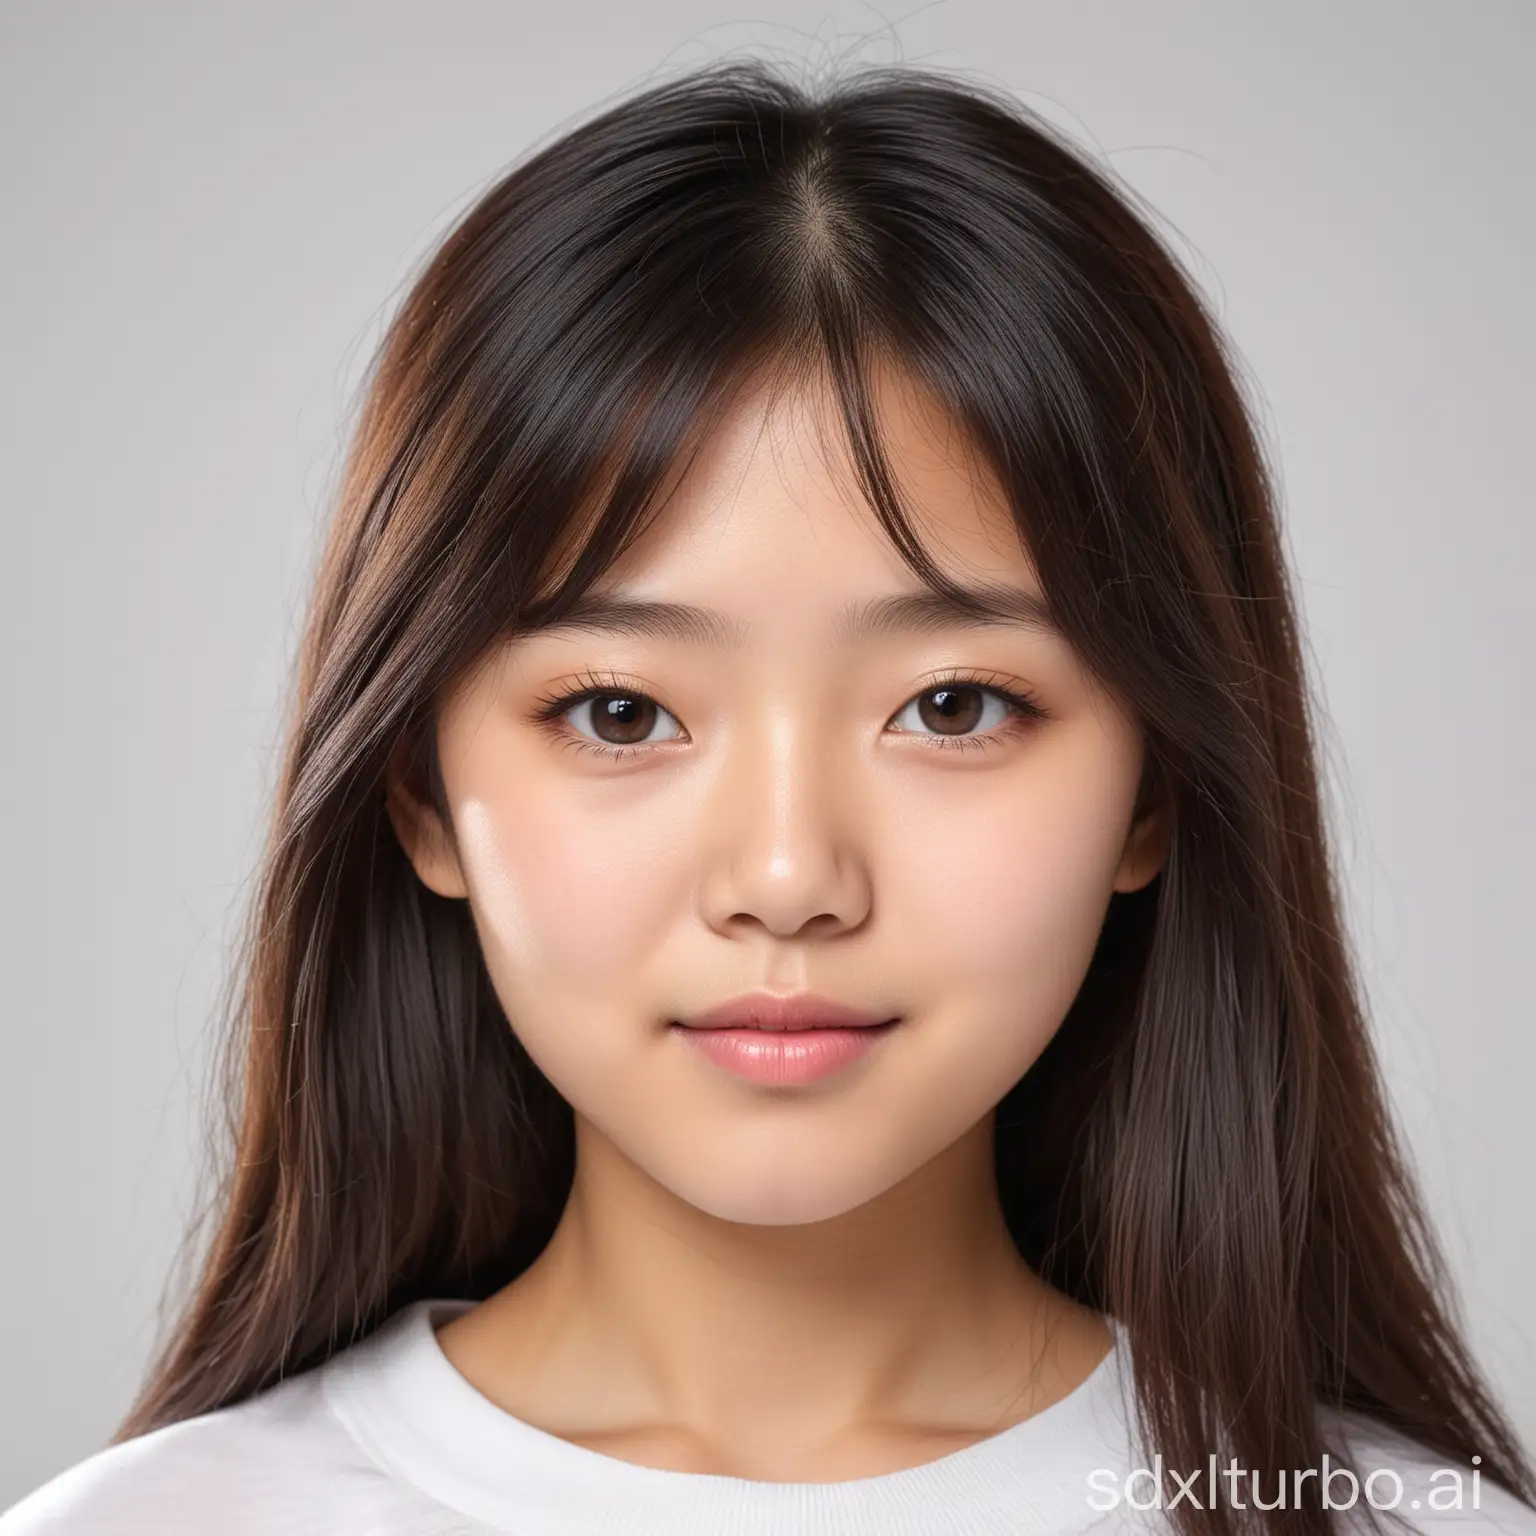 Young-Asian-Girls-White-Background-Identification-Portrait